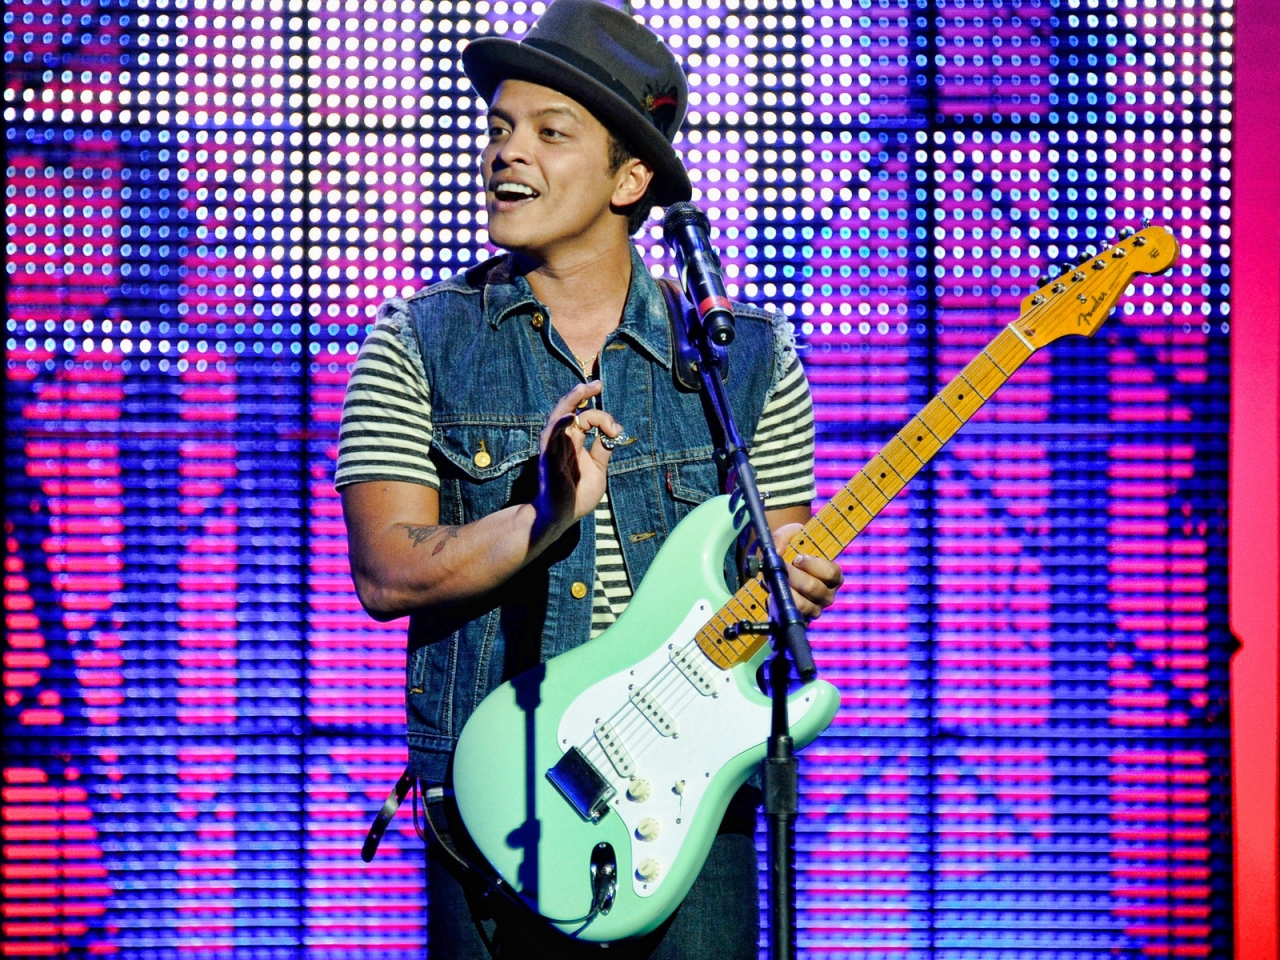 Bruno Mars in Concert for 1280 x 960 resolution